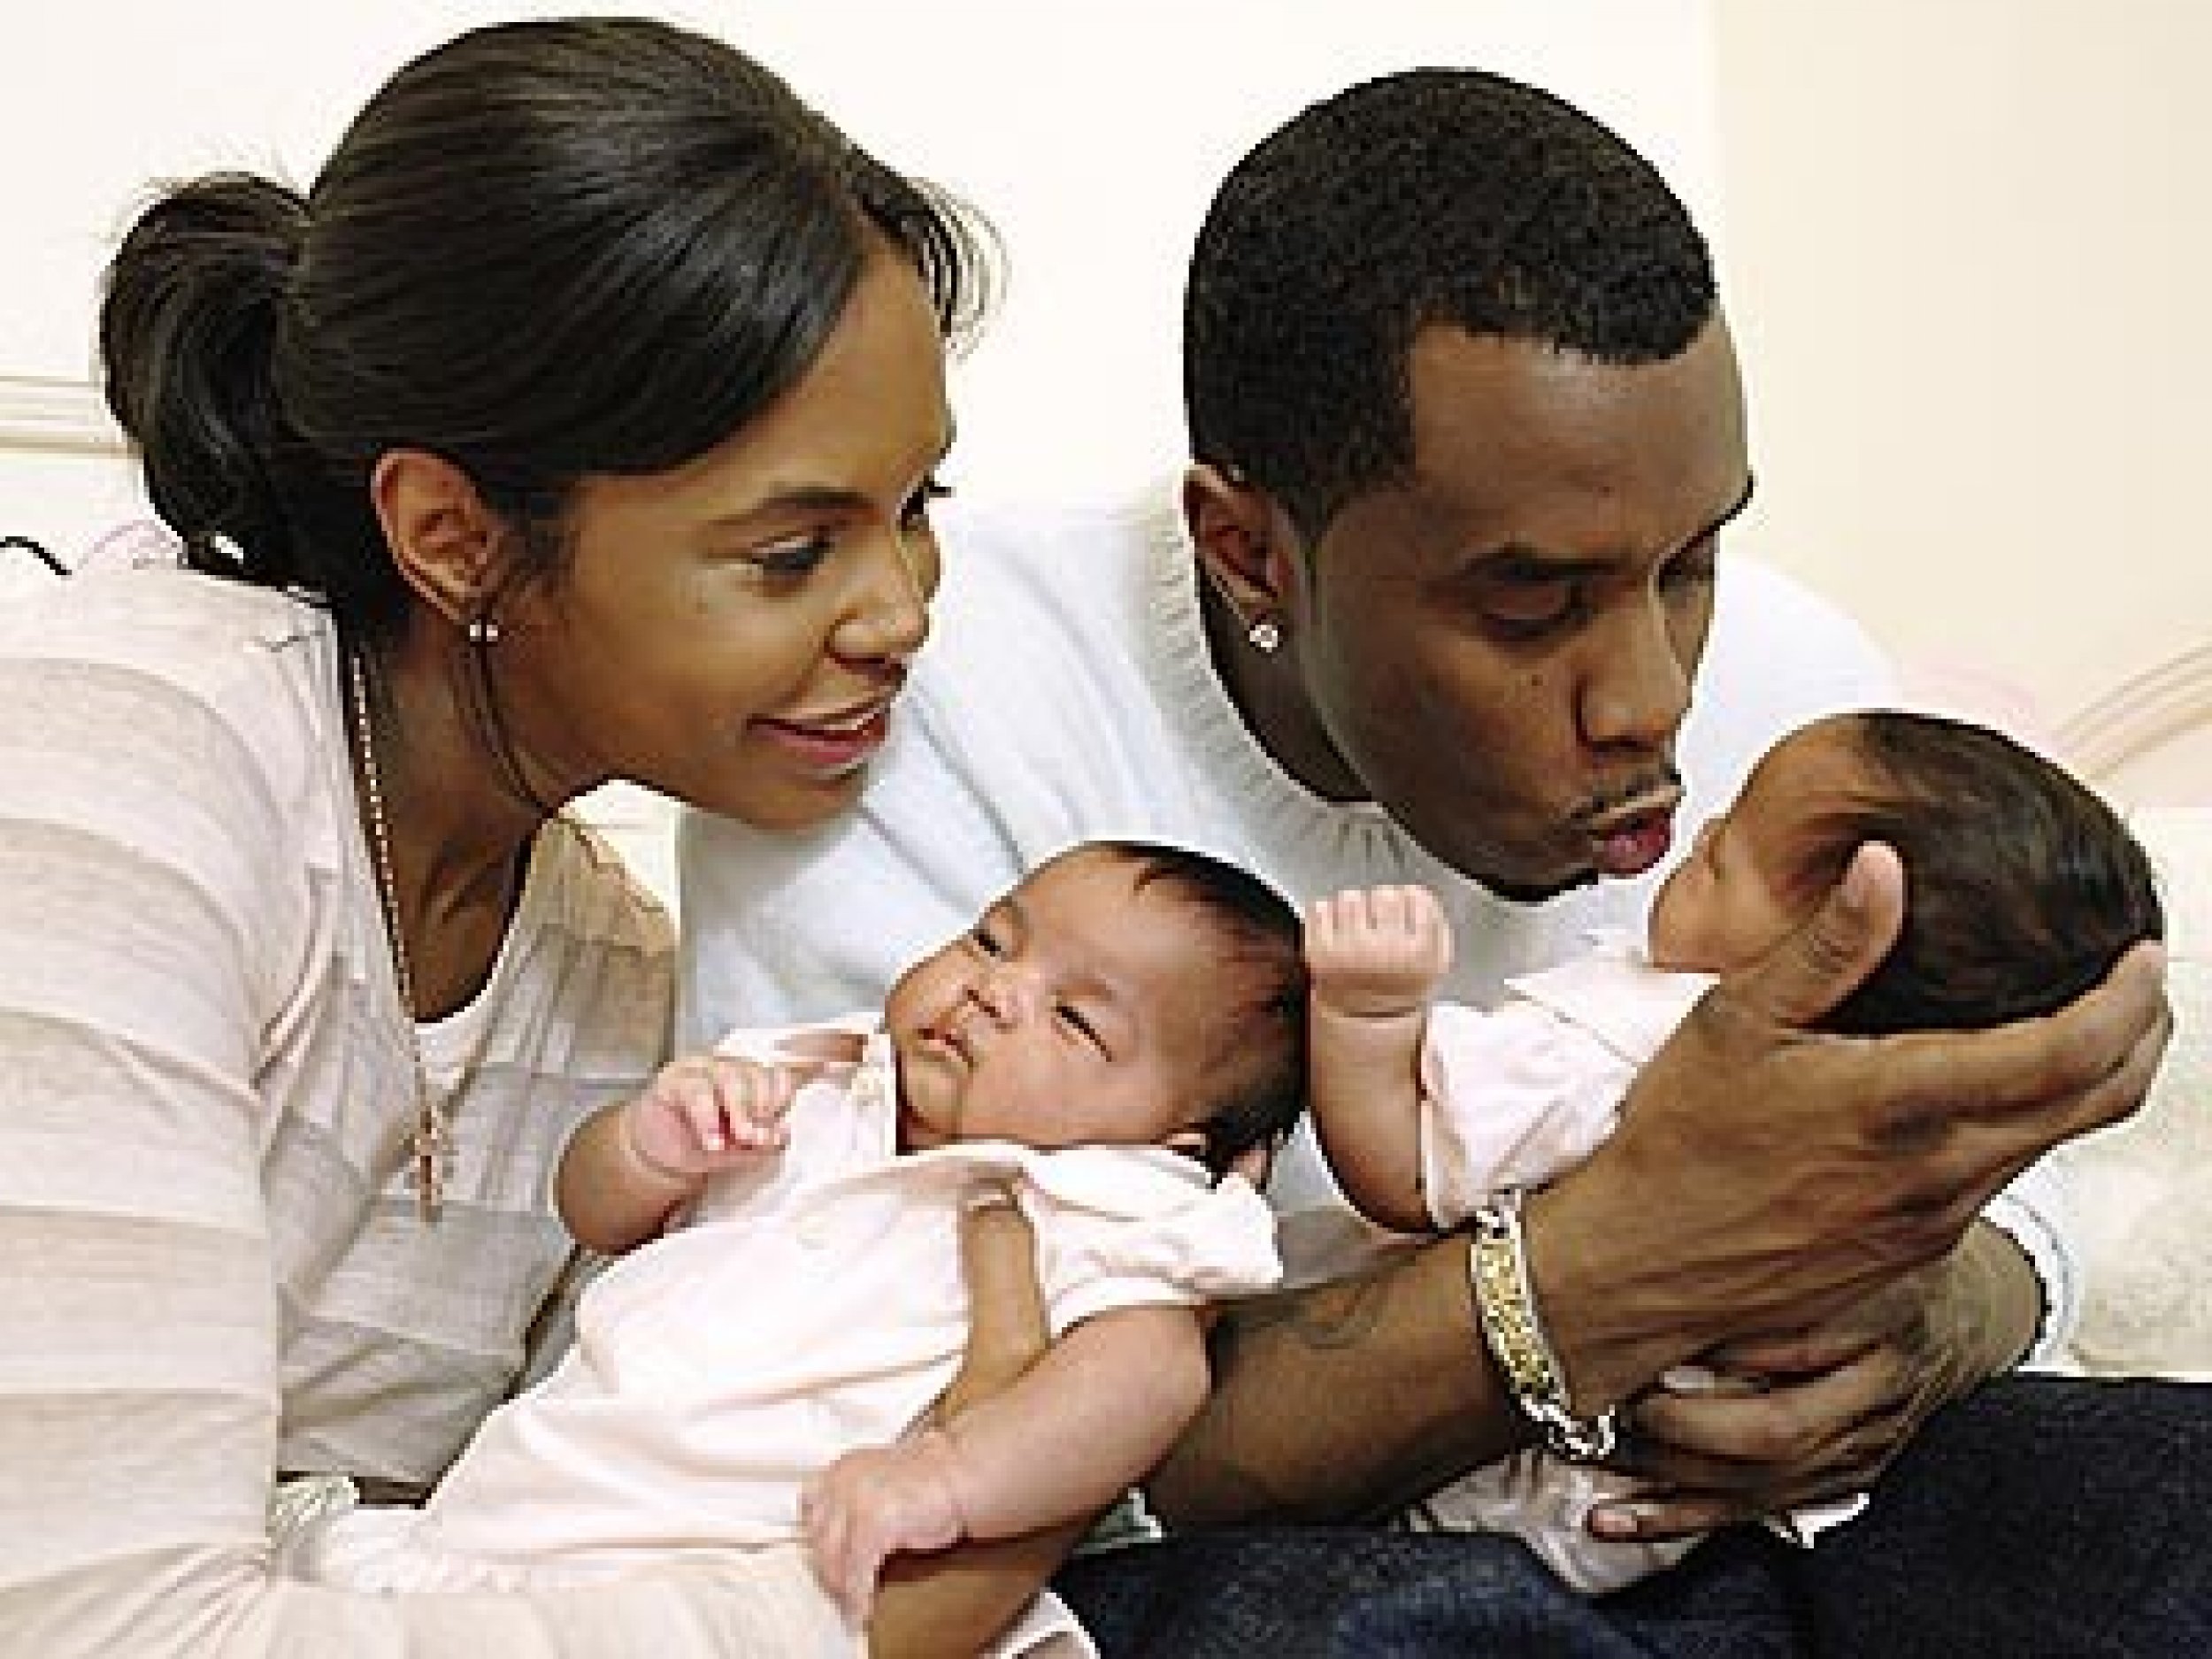 Sean P. Diddy Combs with girlfriend Kimberly Porter and their twin babies.